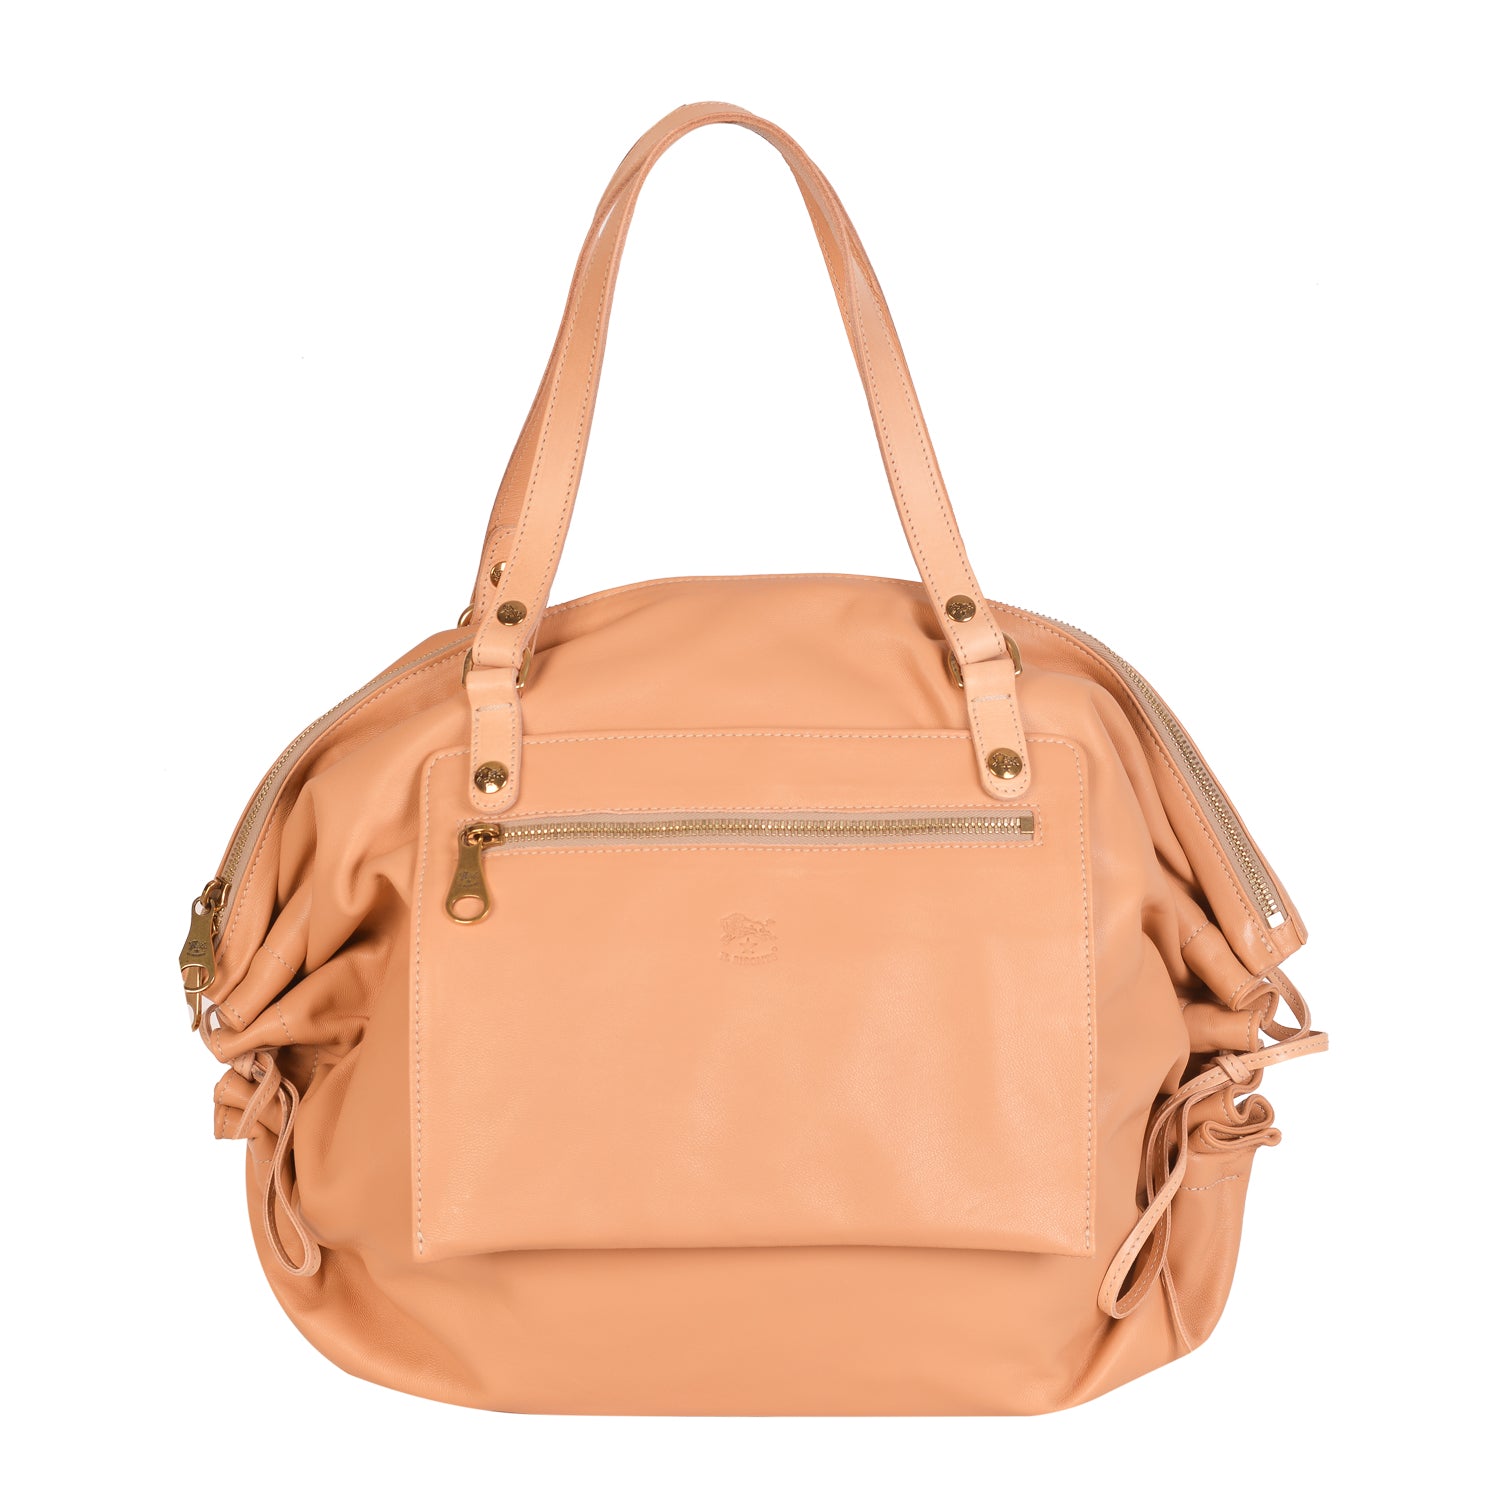 NEW IL BISONTE WOMEN'S CANDY COLLECTION SHOULDER BAG IN BEIGE LEATHER